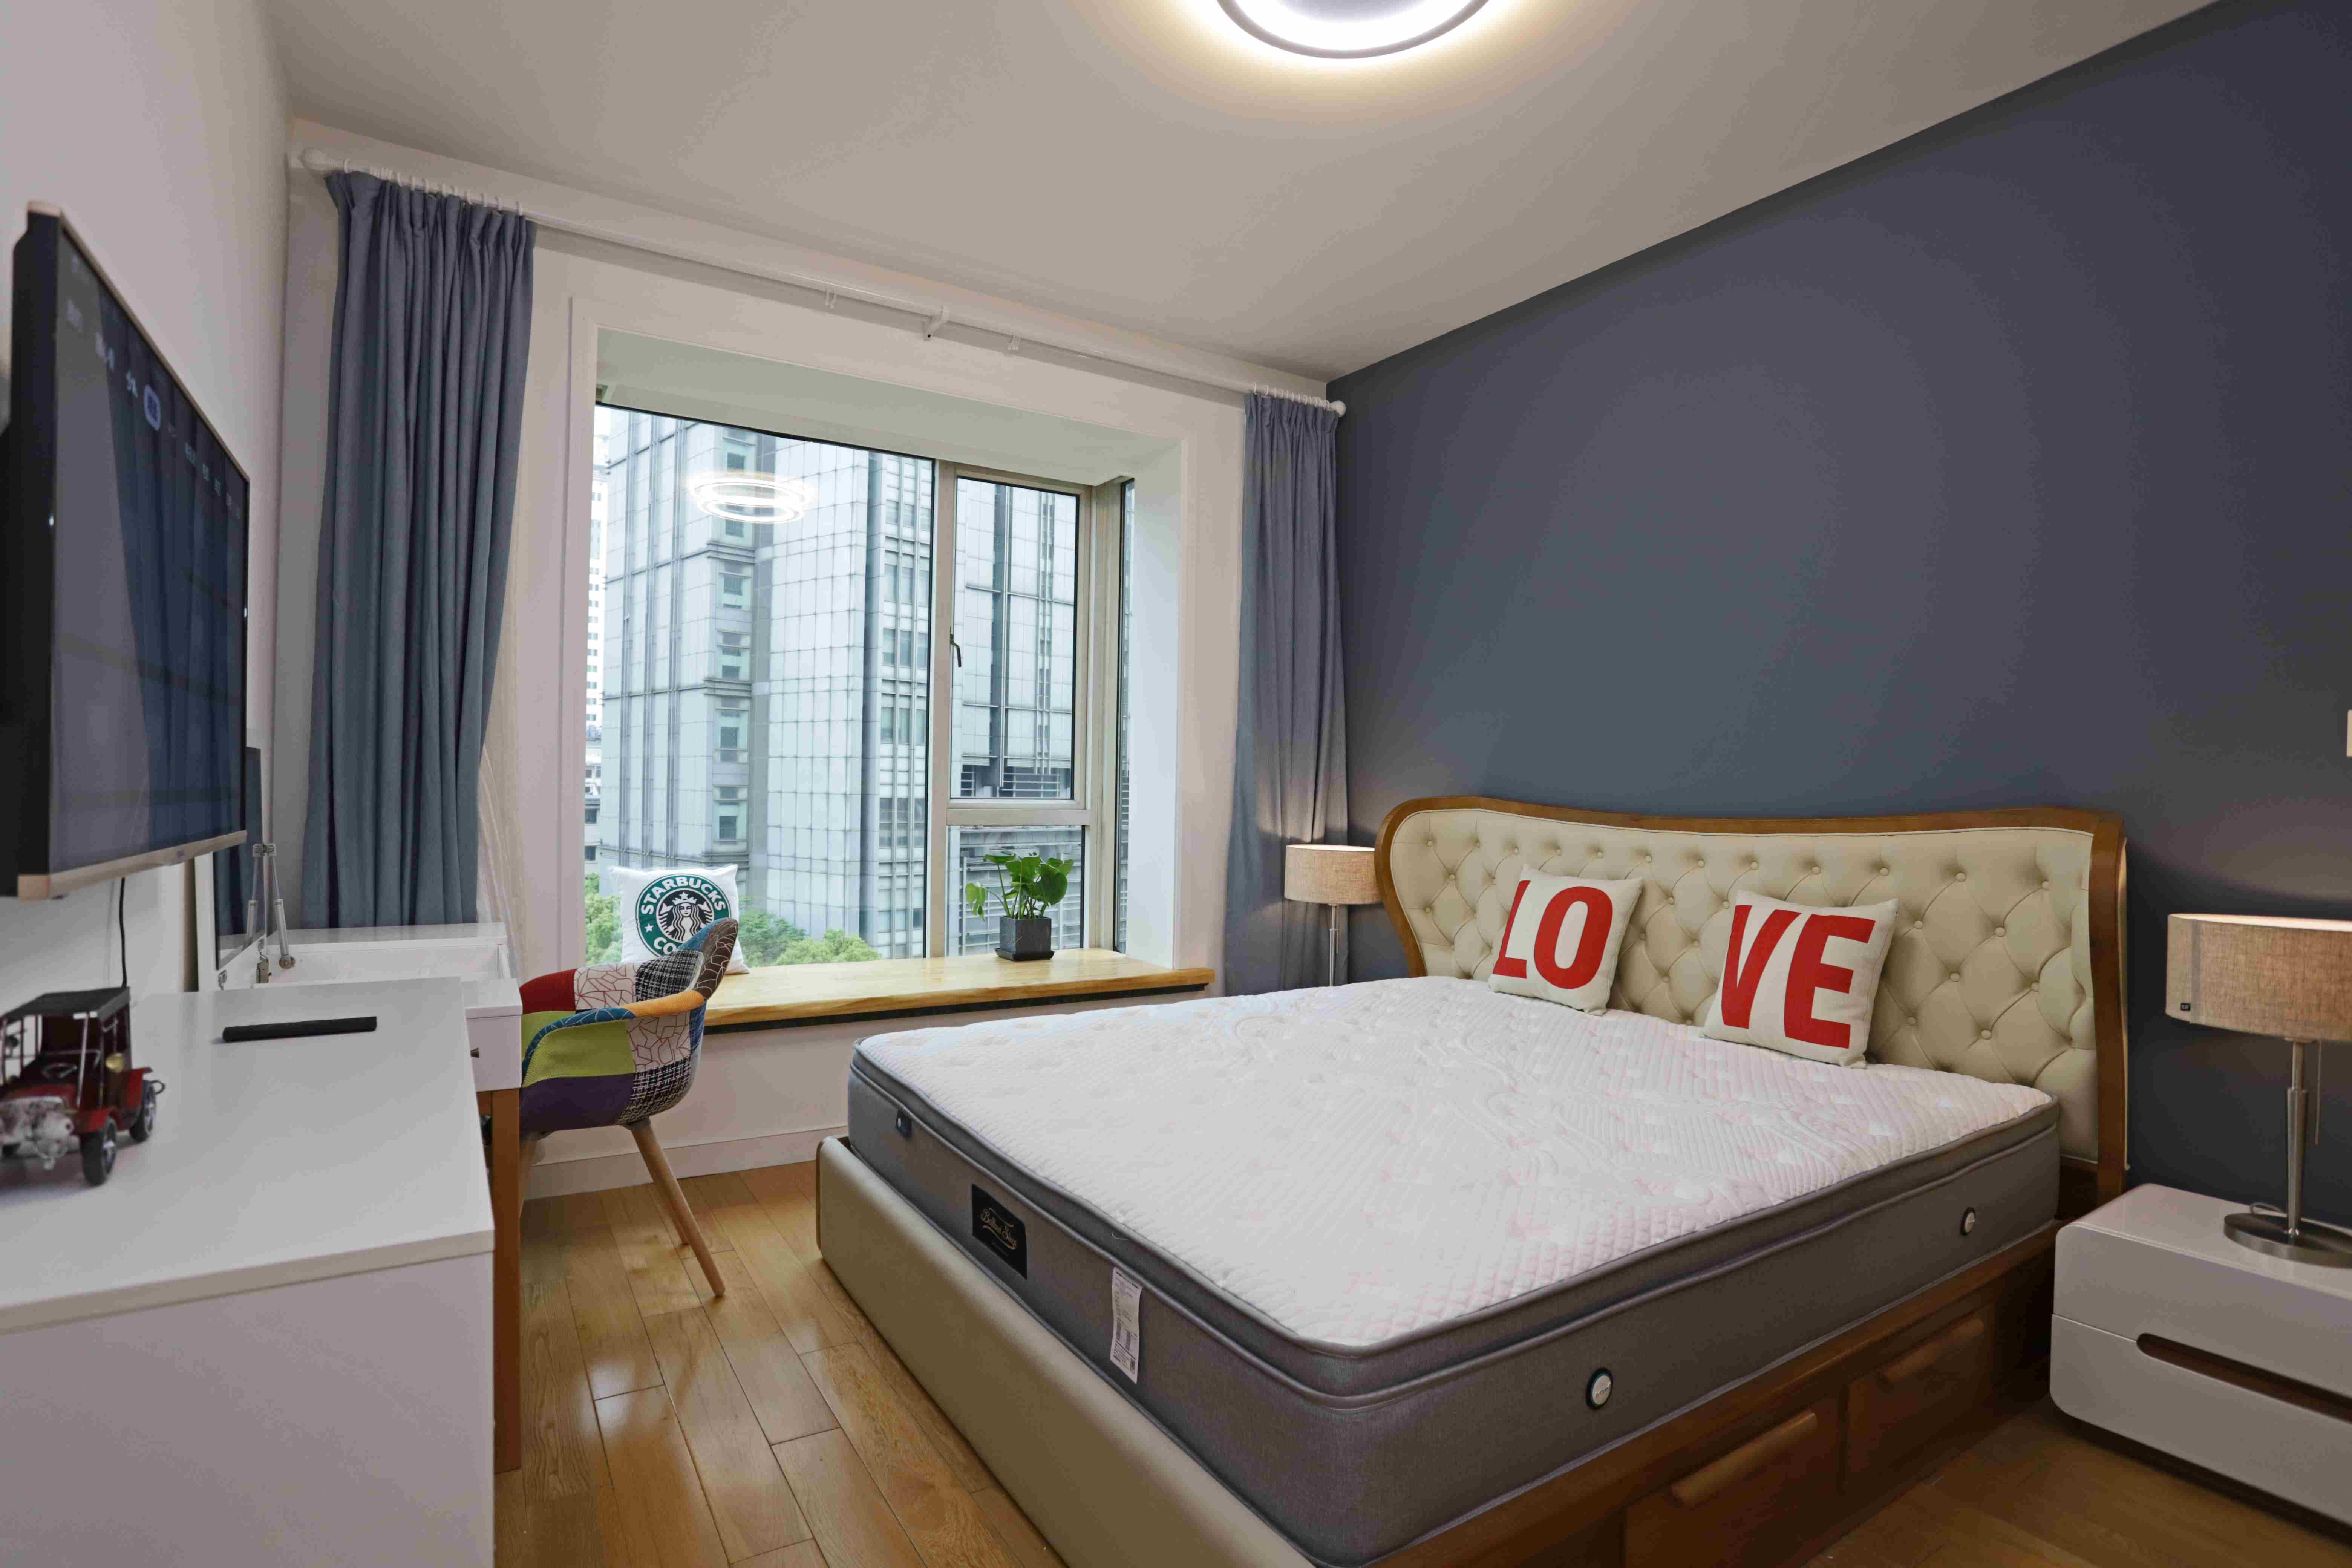 Bright Bedroom Modern Cozy Spacious Top-end Ladoll 1BR Apt for Rent in Shanghai